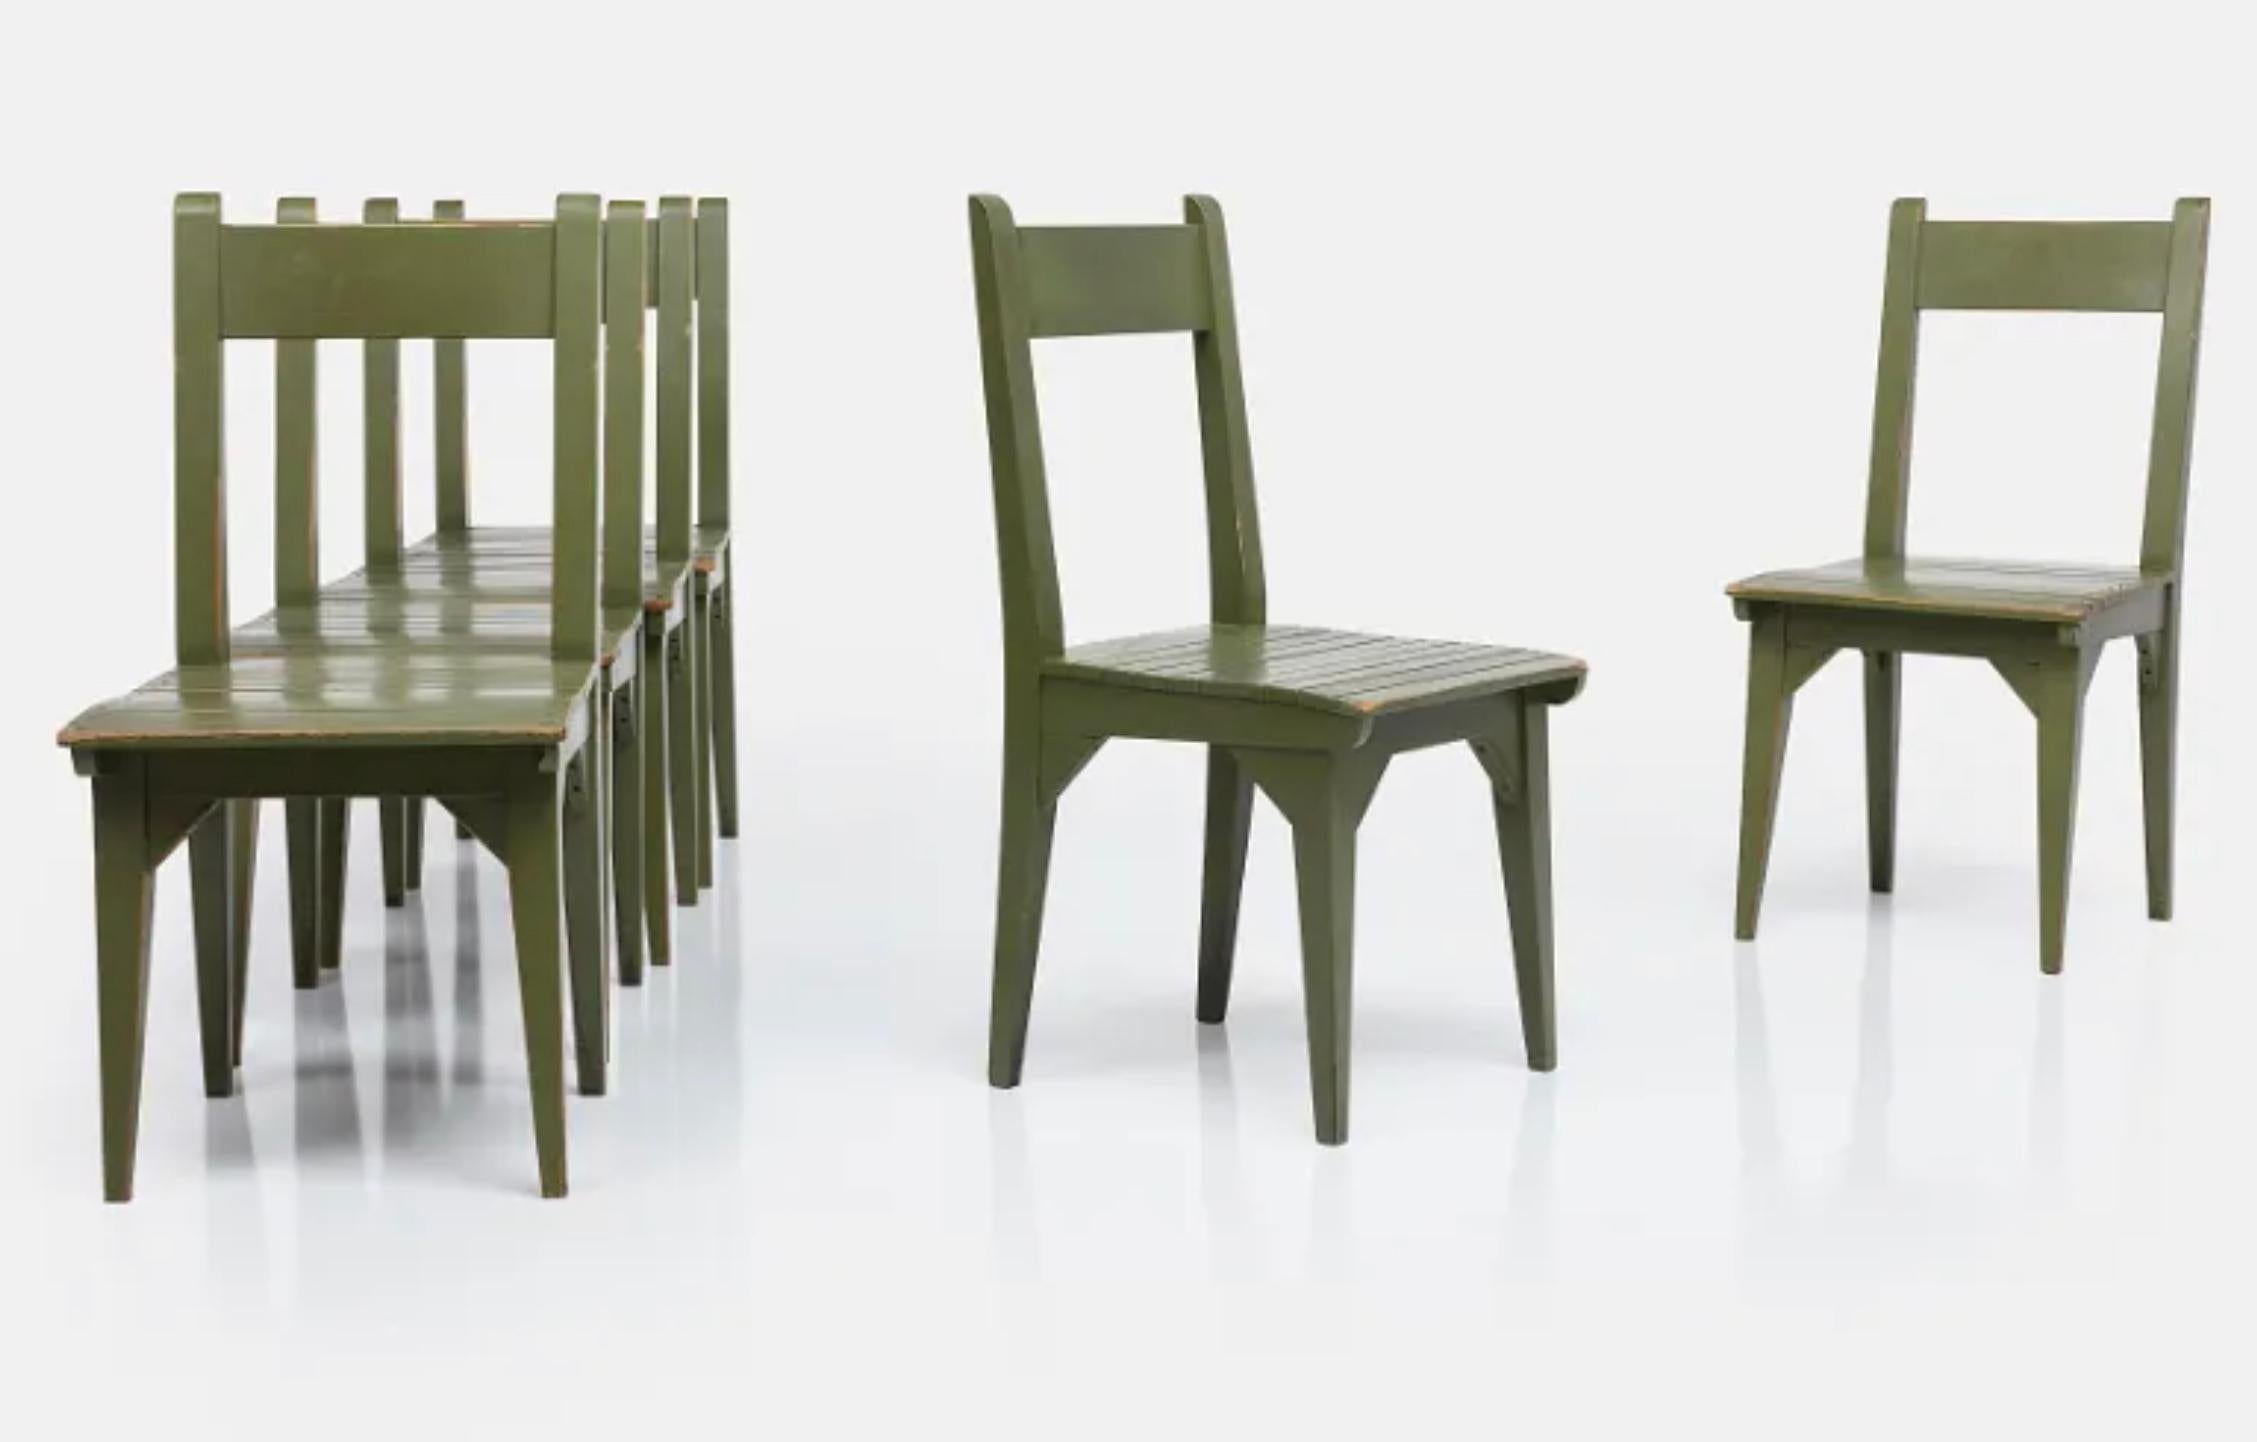 Hand-Painted Roy McMakin Painted Wood Postmodern Dining Chair, Green, 1982, USA. For Sale